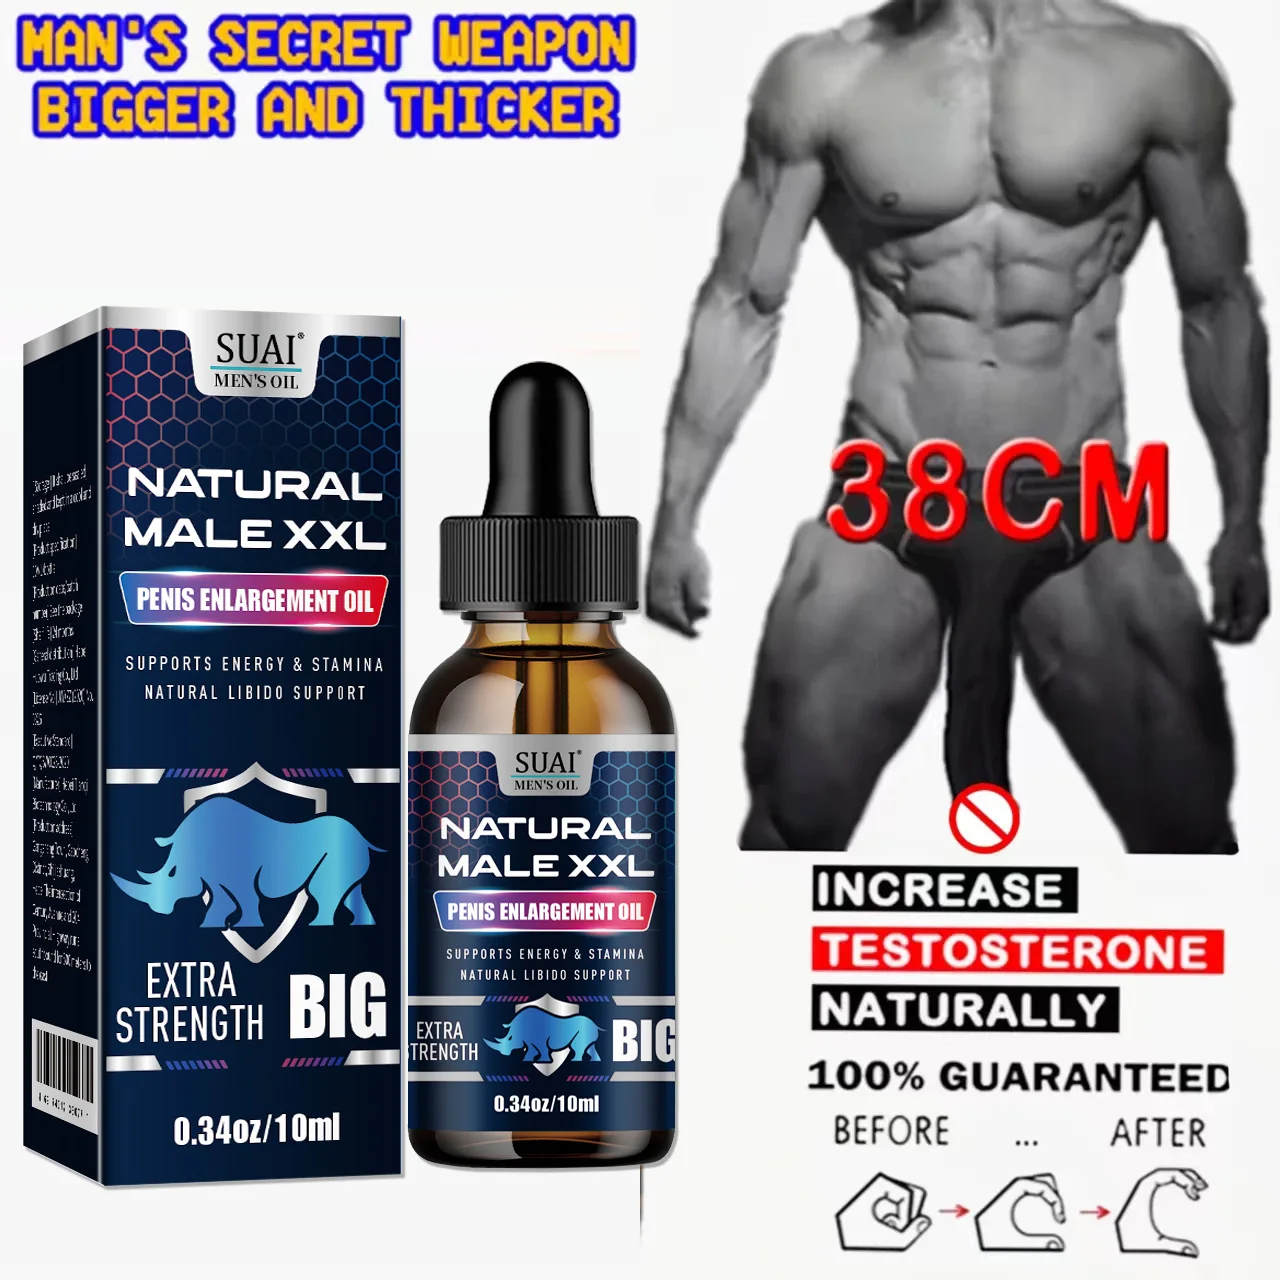 

XXL Penis Enlargement Oil Enhanced Sexual Ability Penis Thickening Oil Increase Growth For Man Big Dick Massag Essential Oils